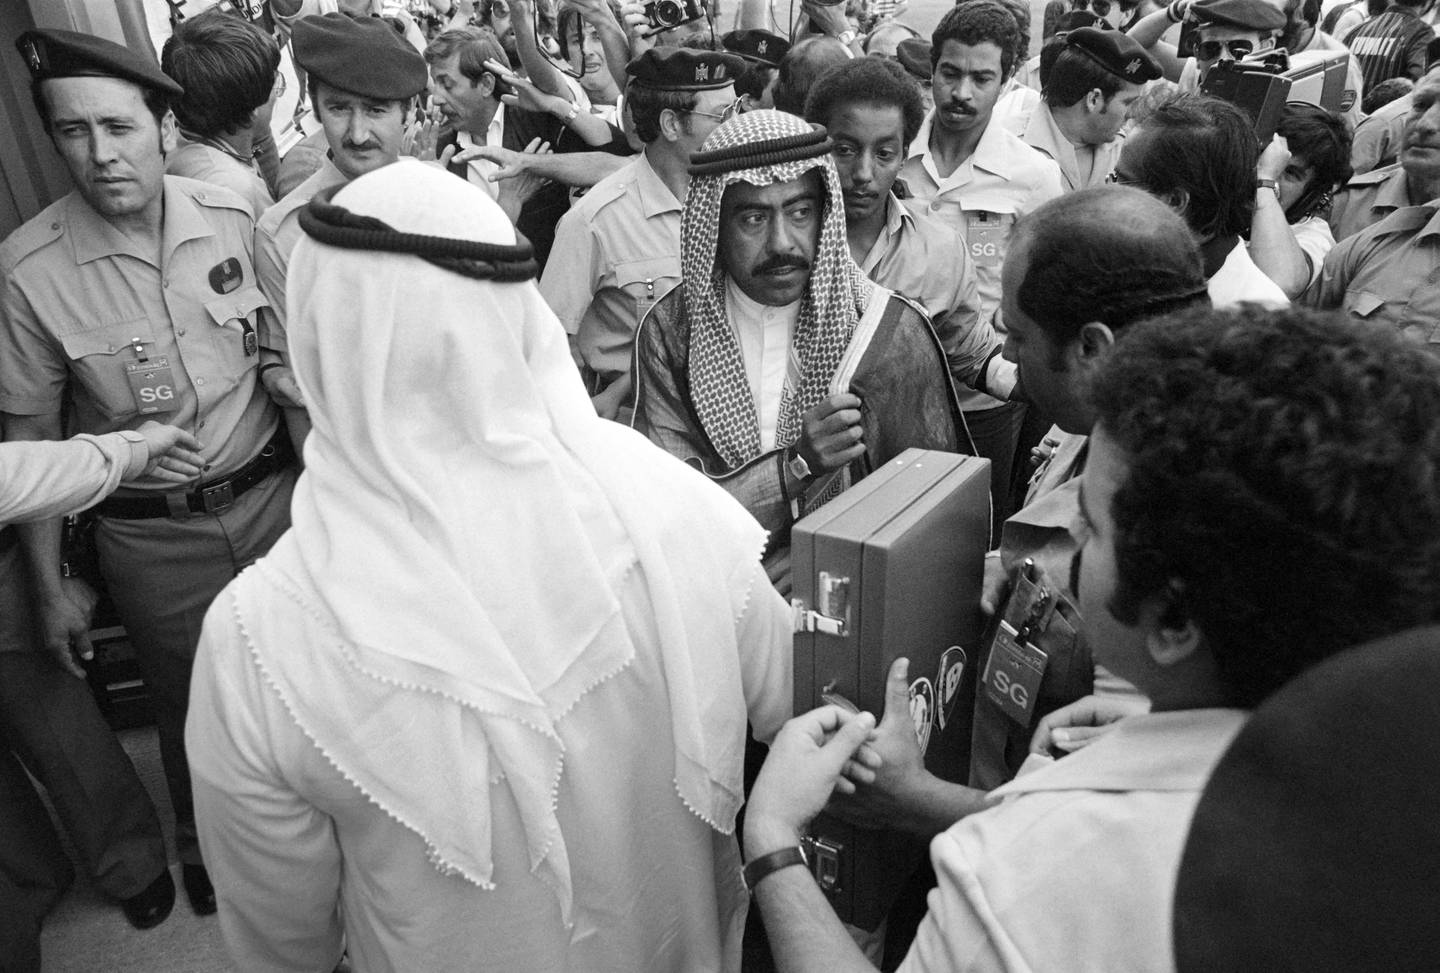 Sheikh Fahd al-Ahmed al-Sabah, the brother of Emir of Kuwait, is pictured during the World Cup football match between France and Kuwait on June 21, 1982, in Valladolid. AFP